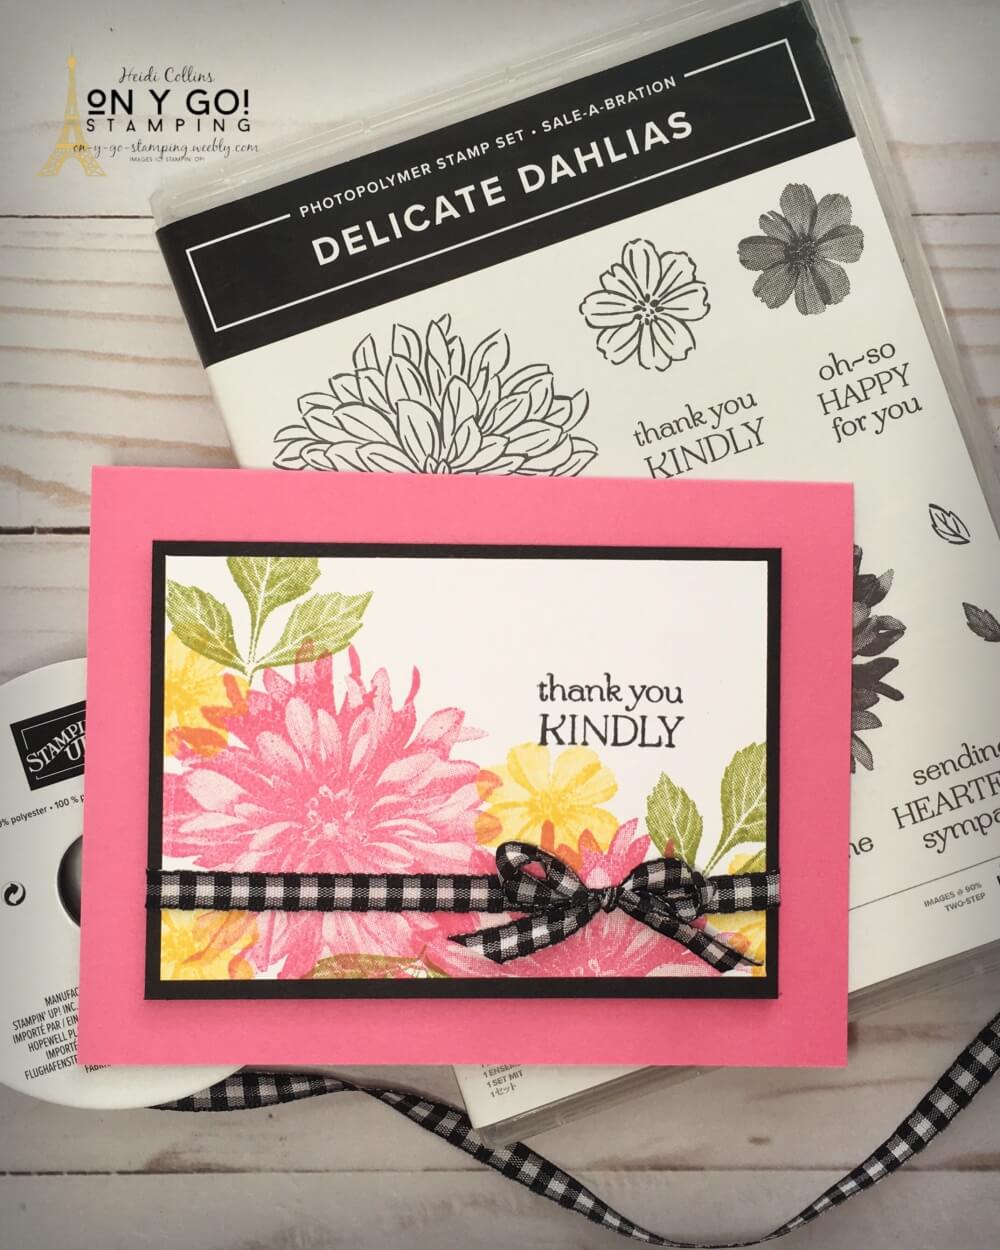 Sale-A-Bration is coming! Get this beautiful floral stamp set for FREE with a $100 order. The stamps in this set can be stamped in a variety of ways. See them all on my website!